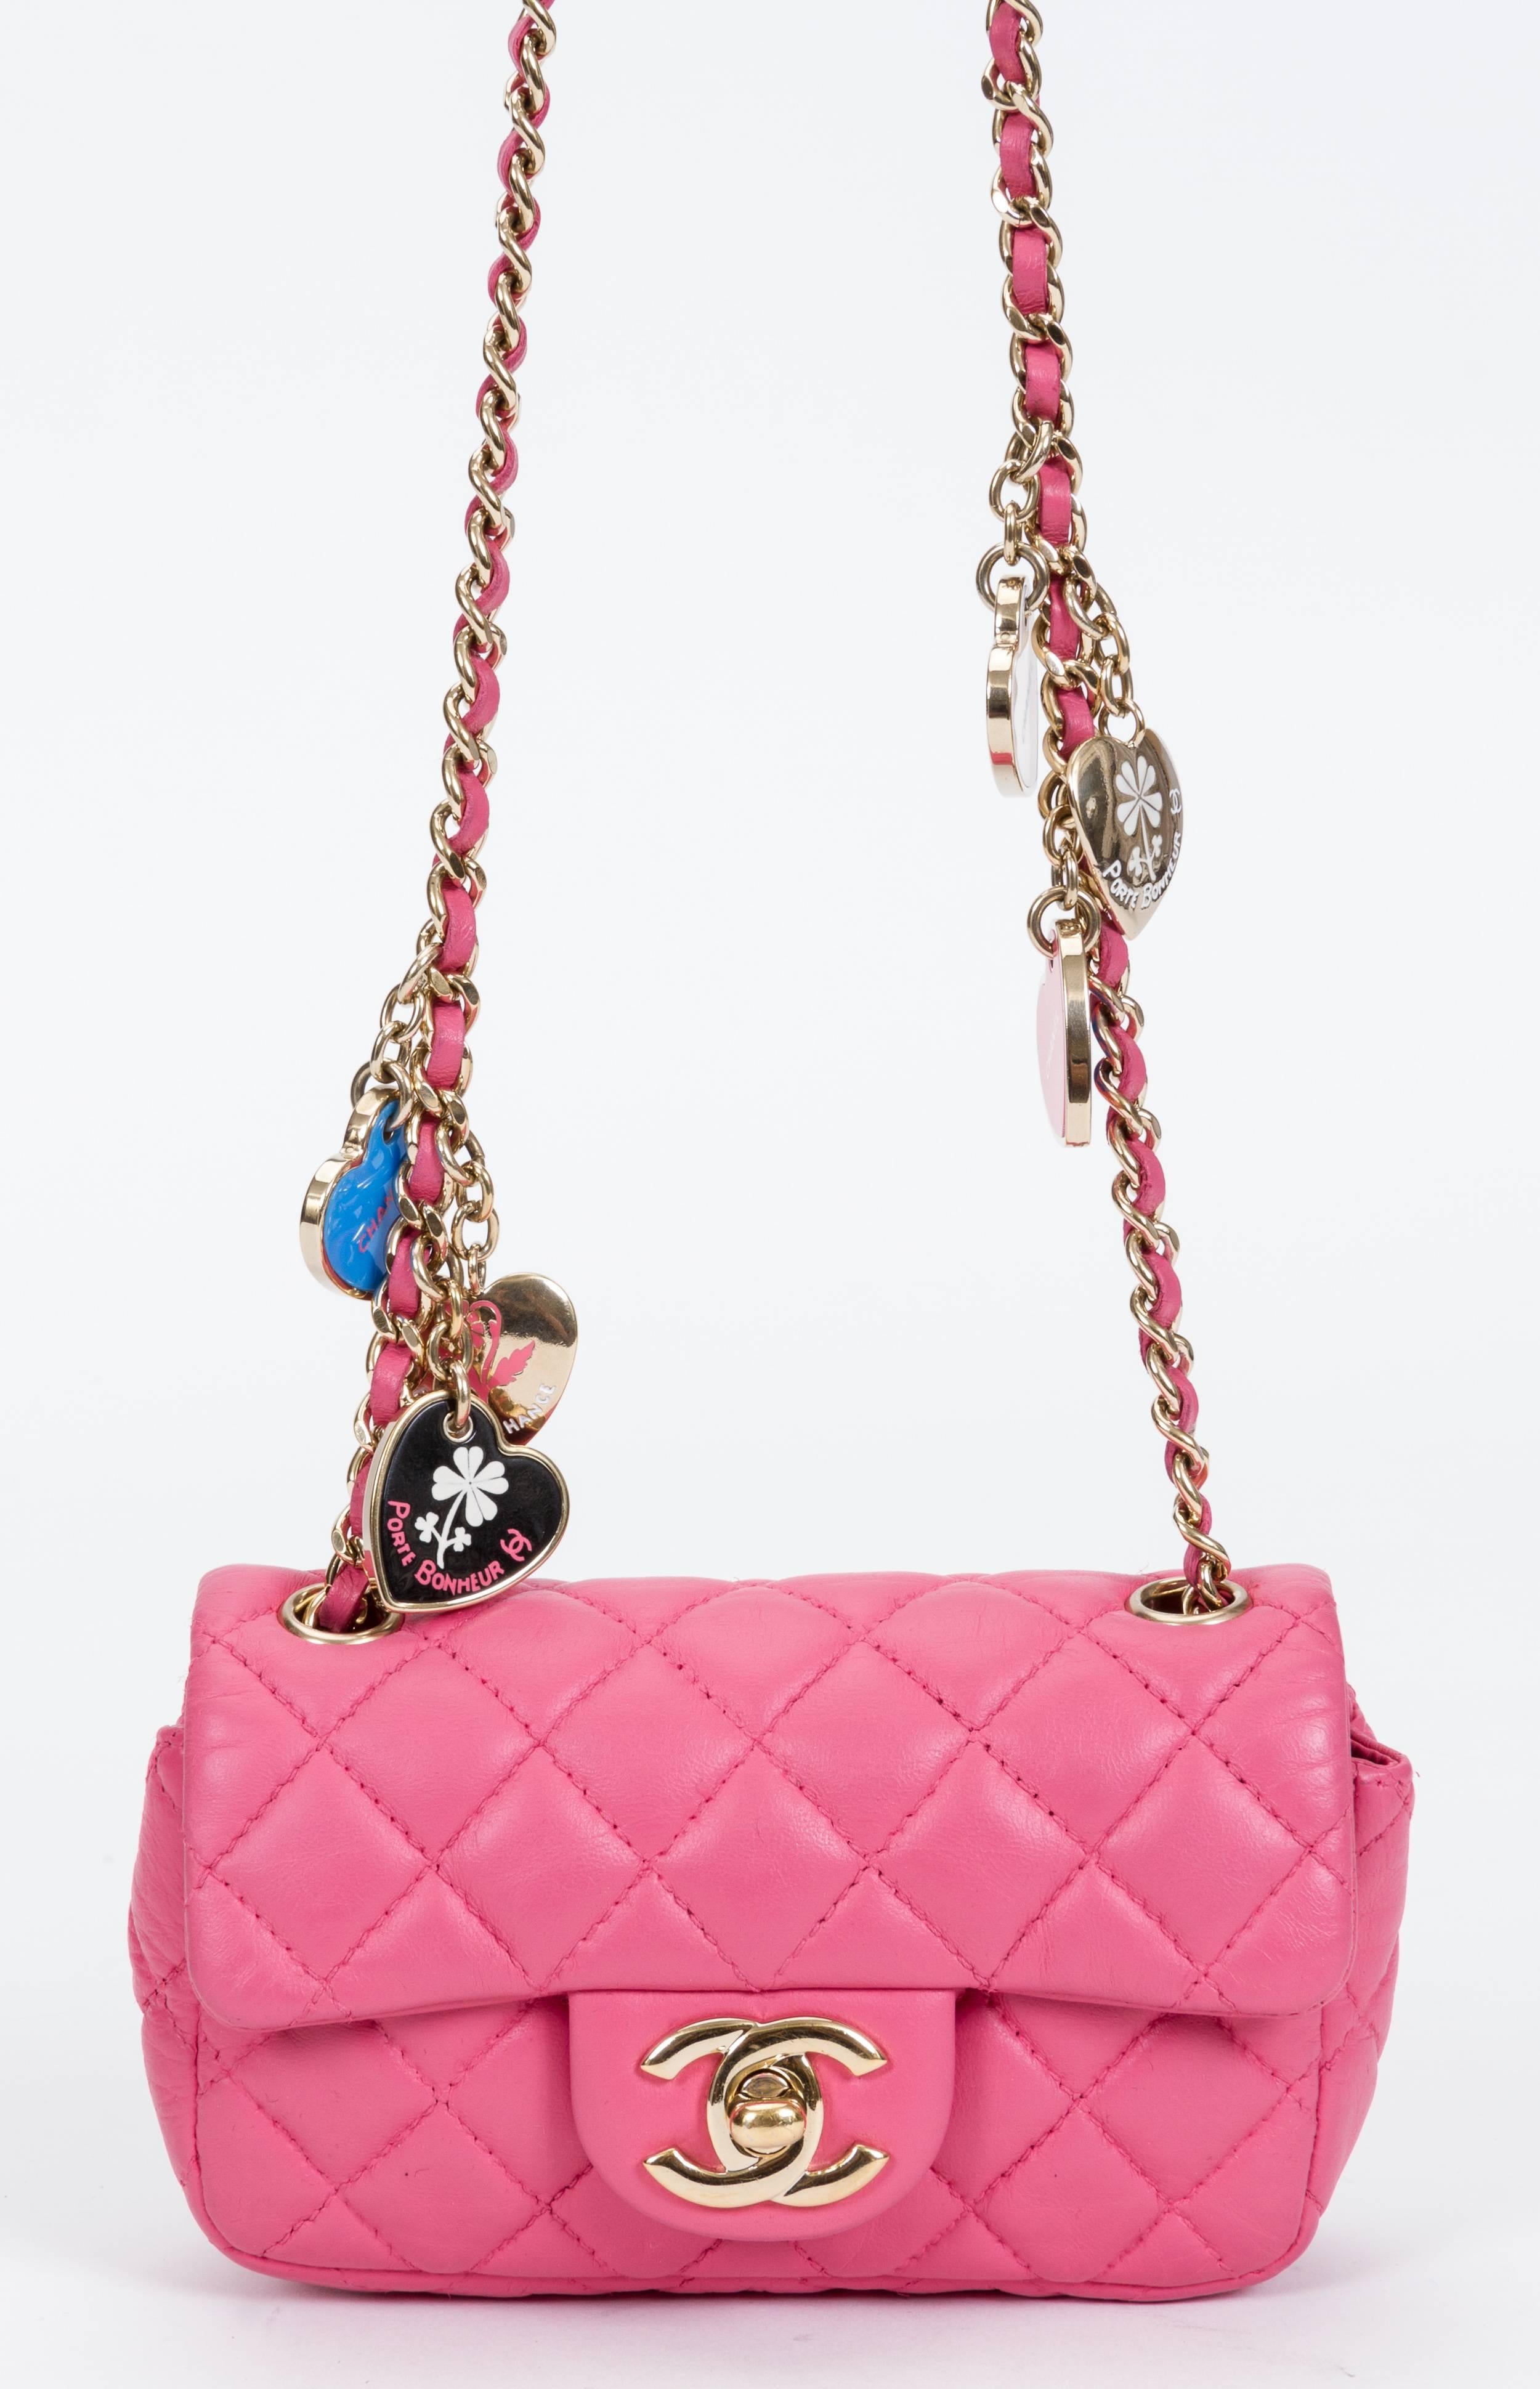 Chanel collectible Valentine s cross body pink lambskin bag. Dangling heart charms. Shoulder drop 23